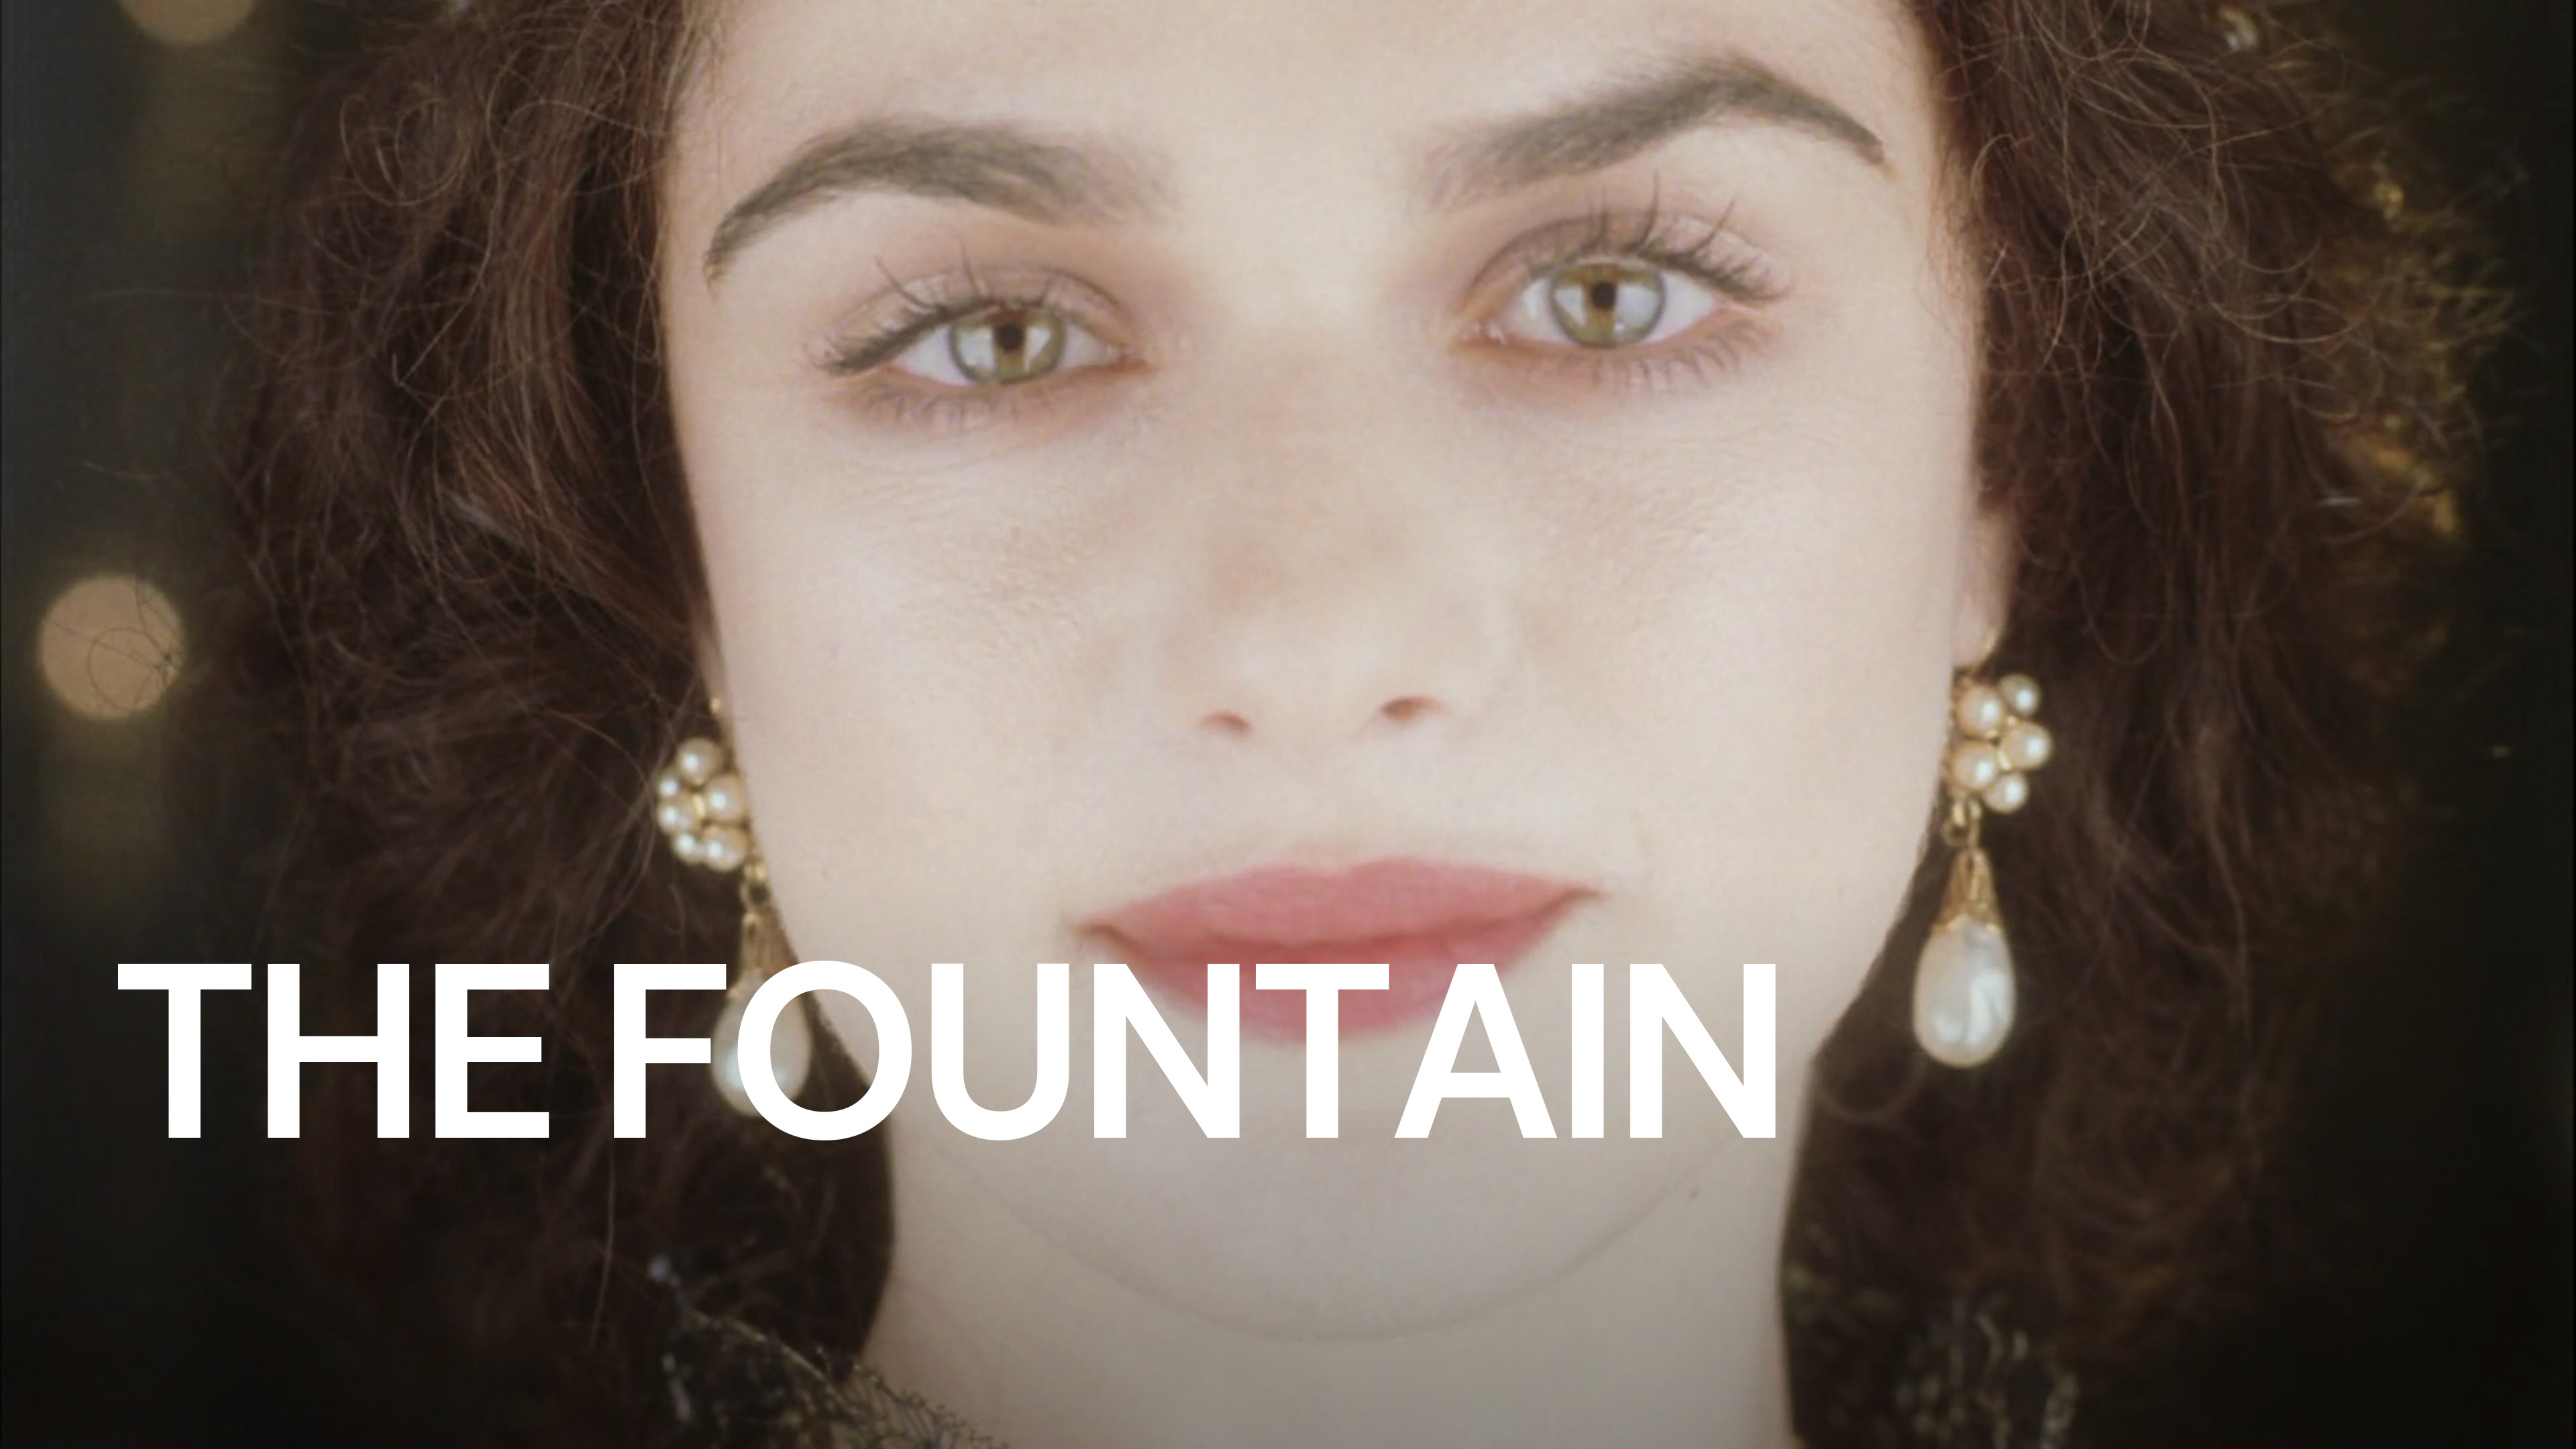 41 Facts about the movie The Fountain - Facts.net